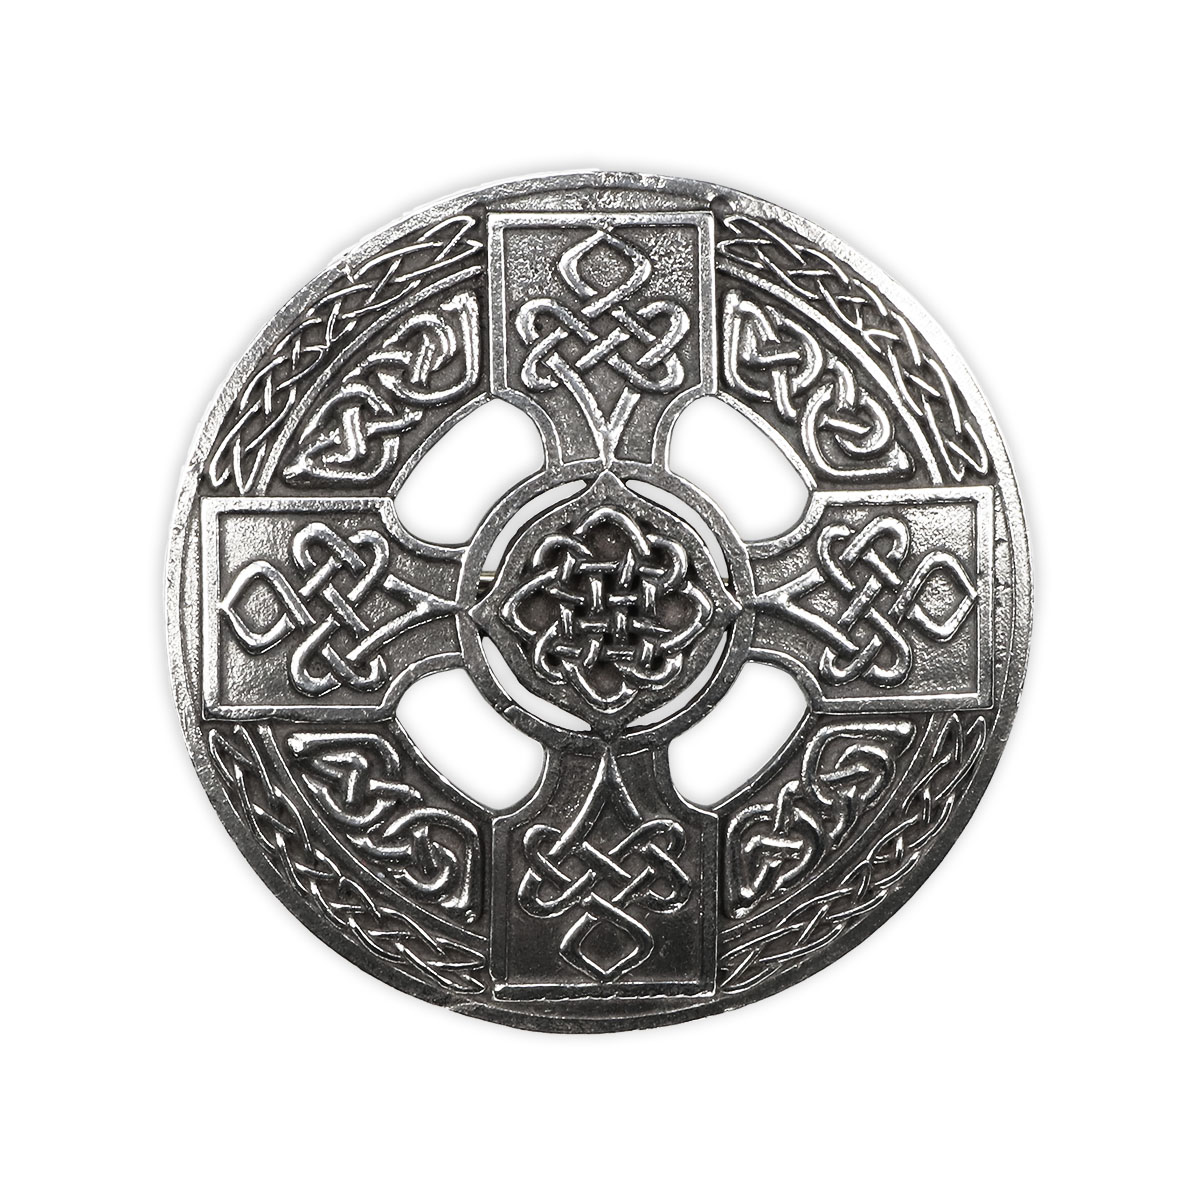 A Celtic Cross Pewter Plaid Brooch on a white background.